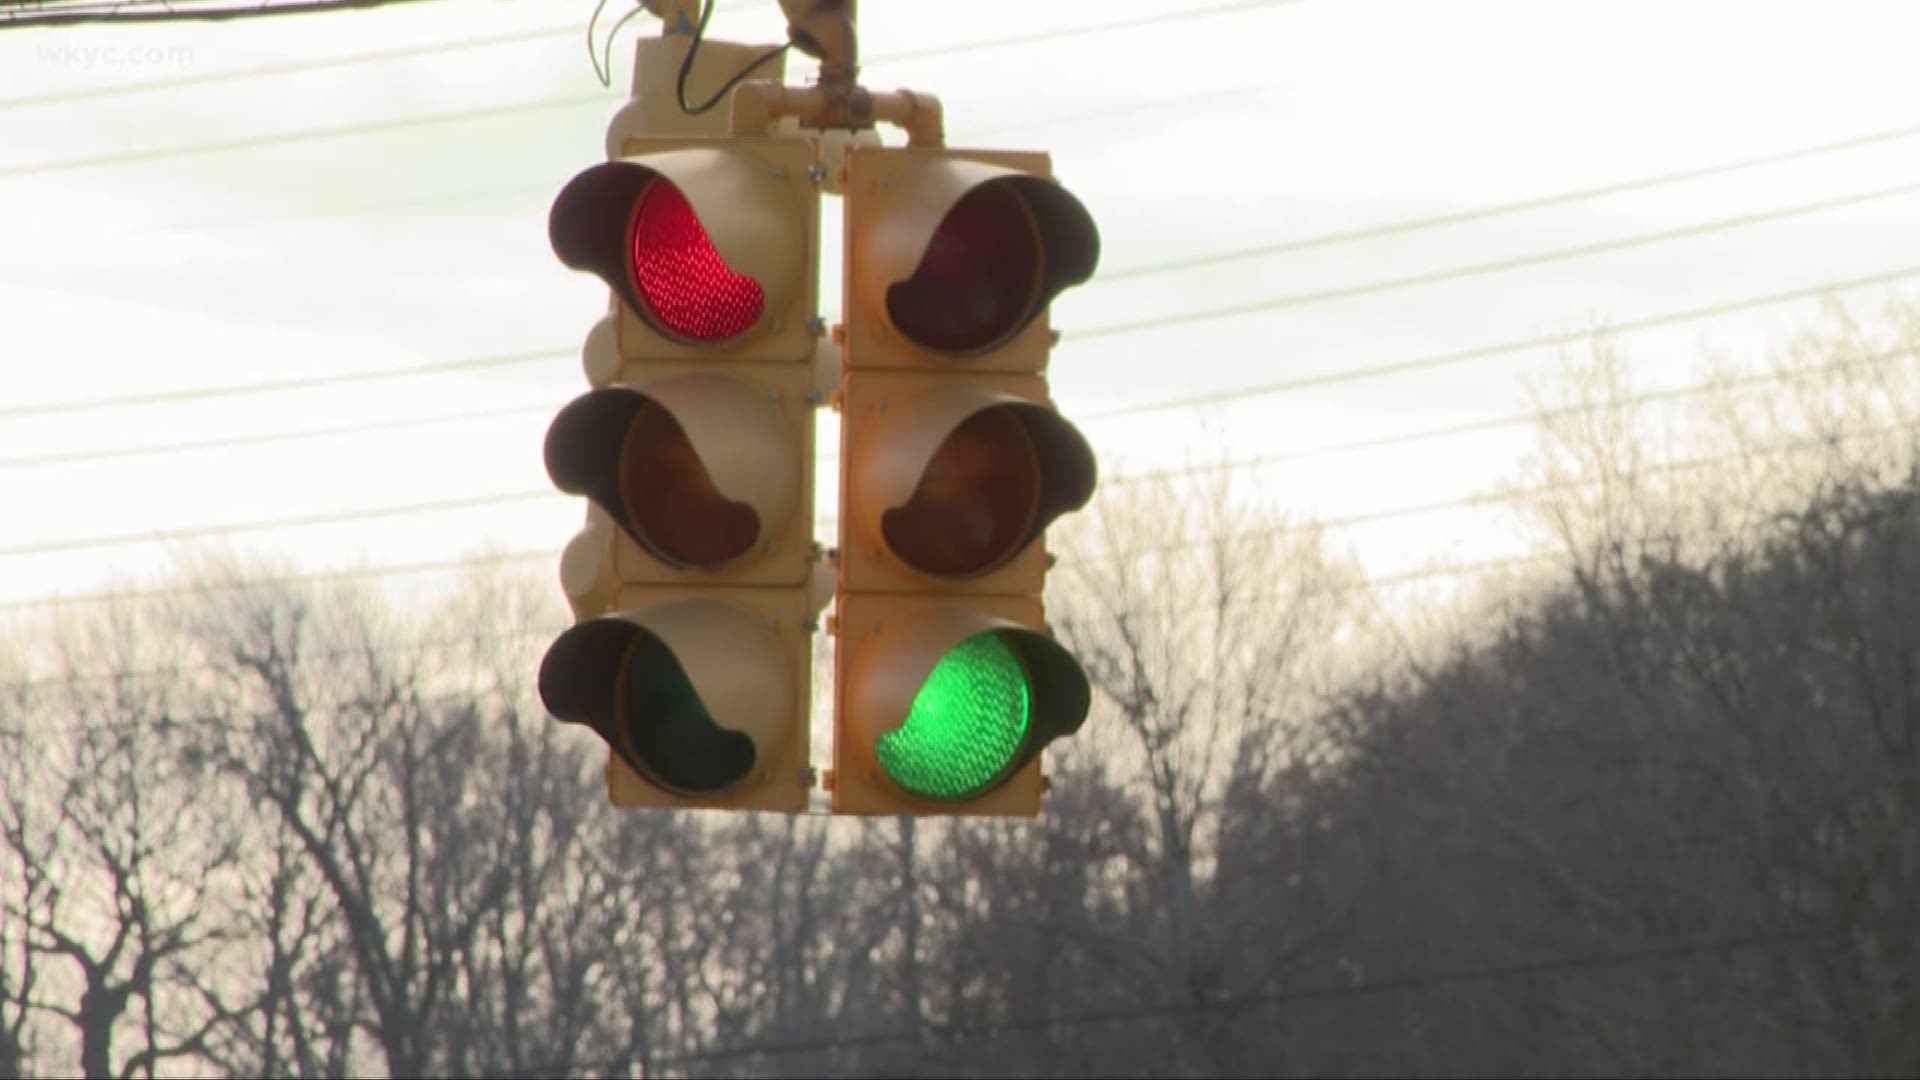 March 8, 2019: If an ambulance gets stuck in traffic behind you at a red light, are you allowed to run that red light so it can pass? We went to the experts to find out the laws.